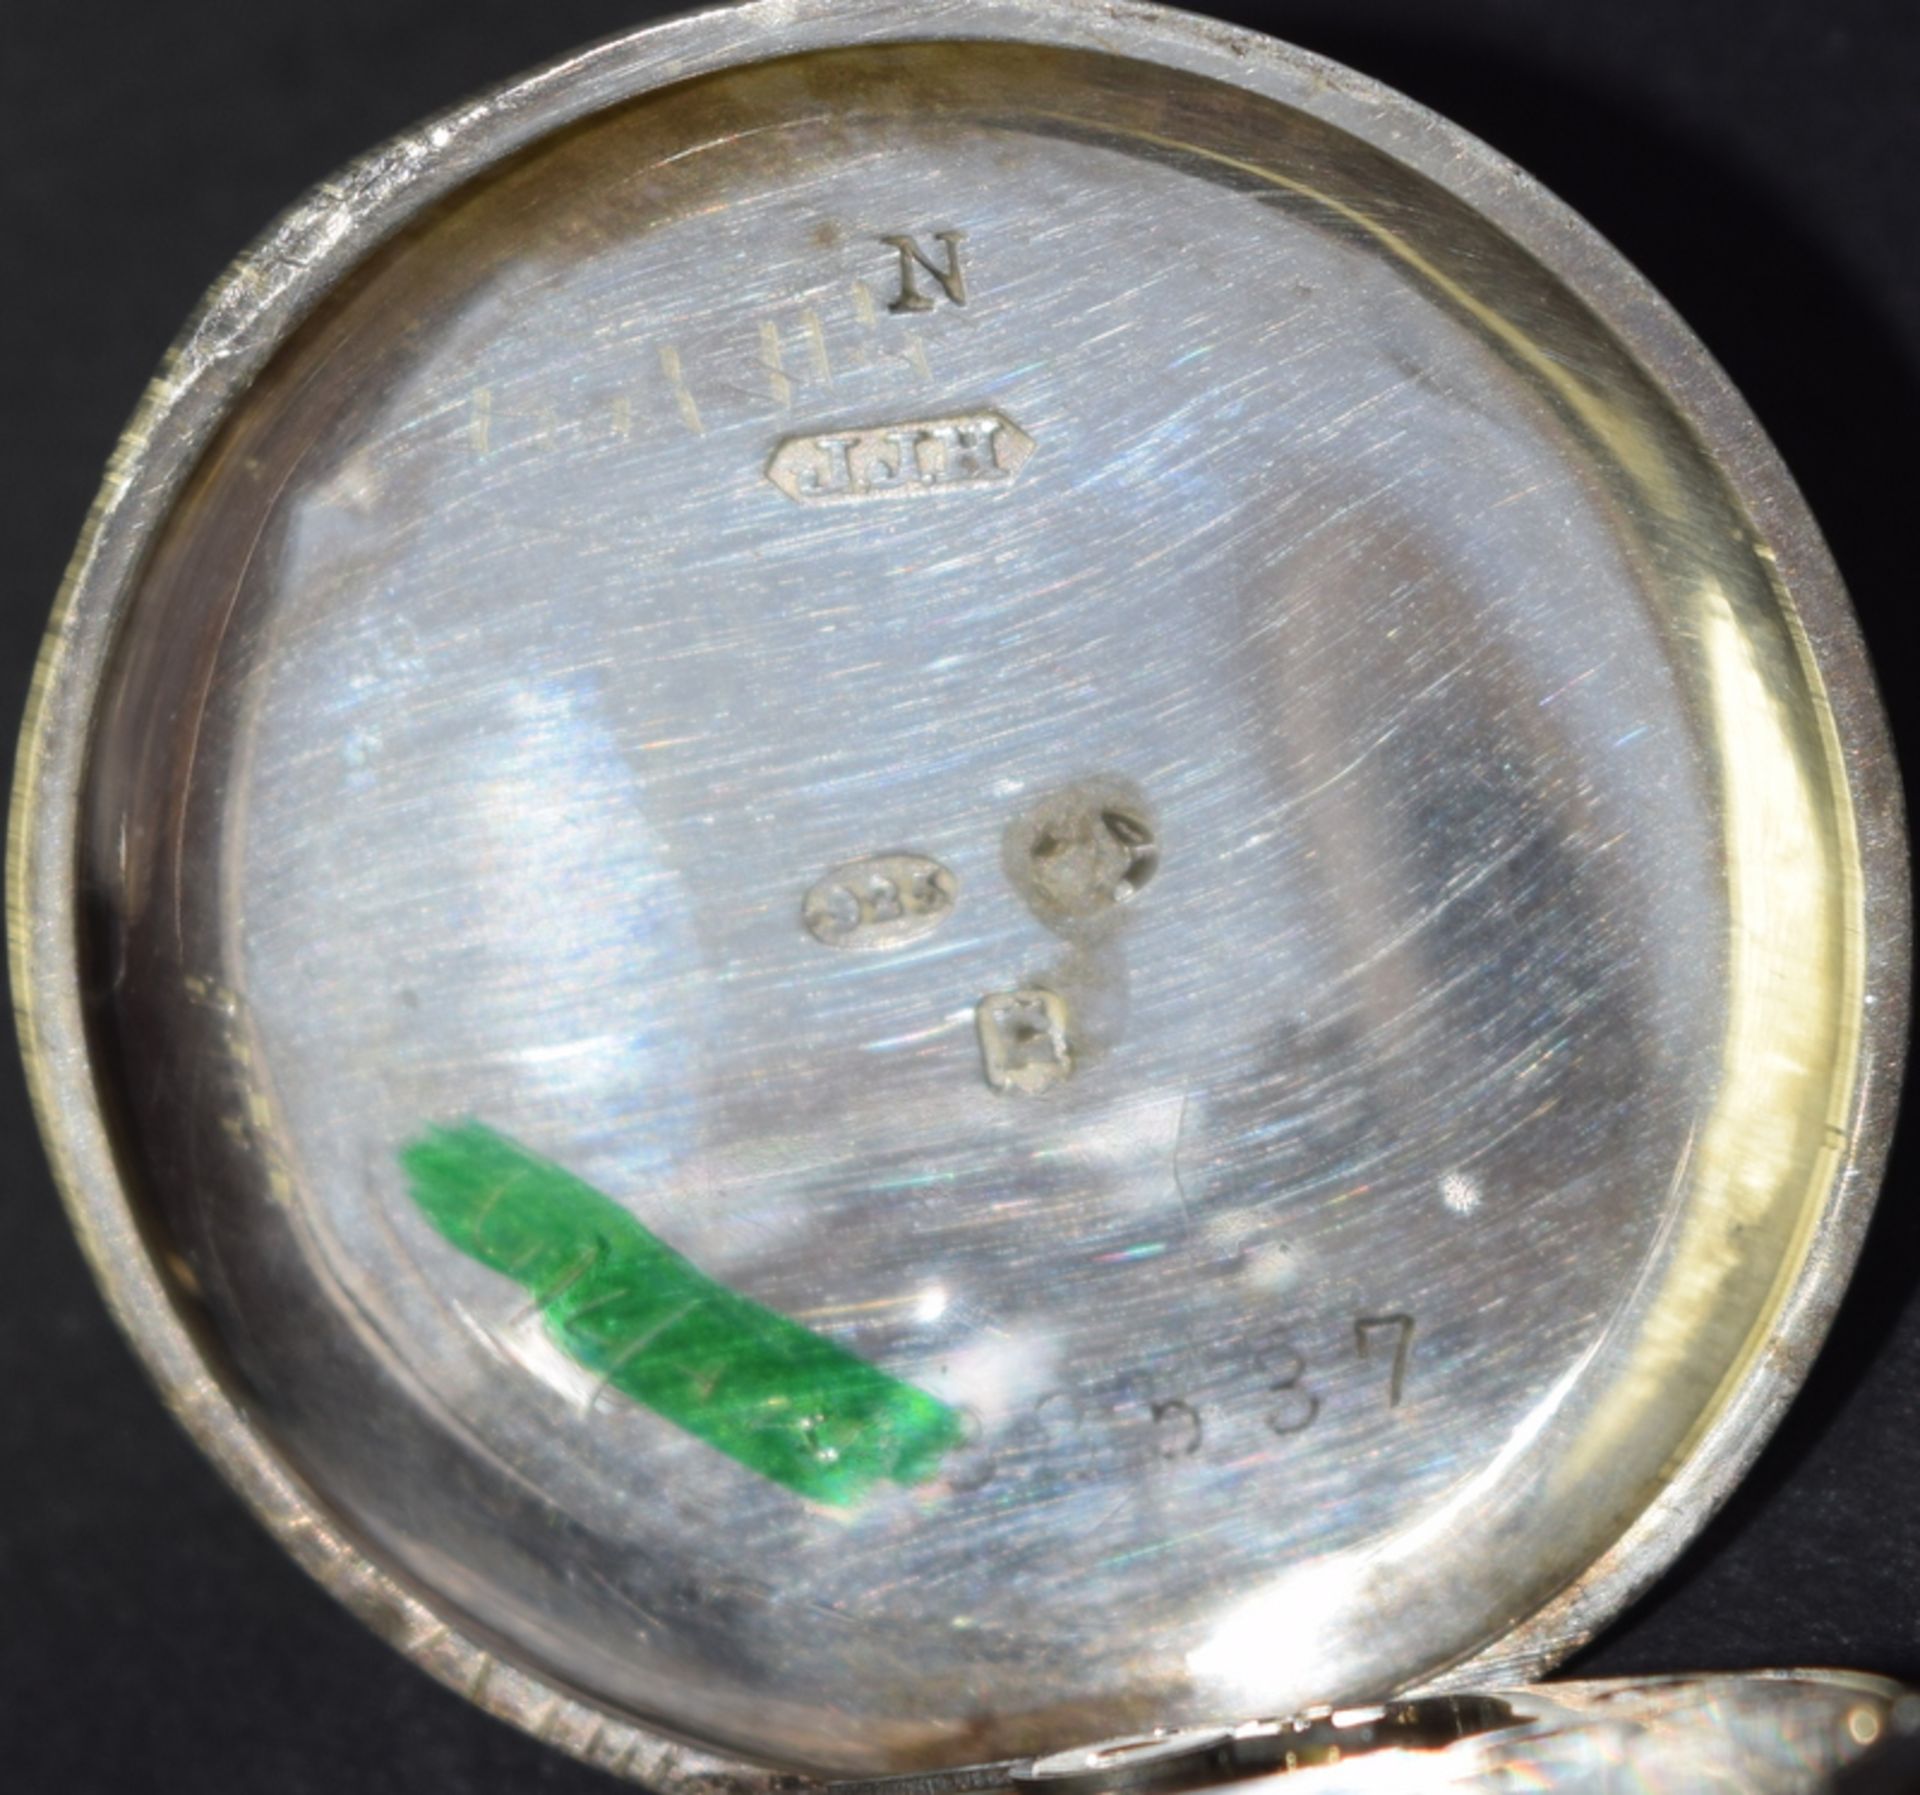 WW1 Era Military Trench Watch Silver Case - Image 6 of 6